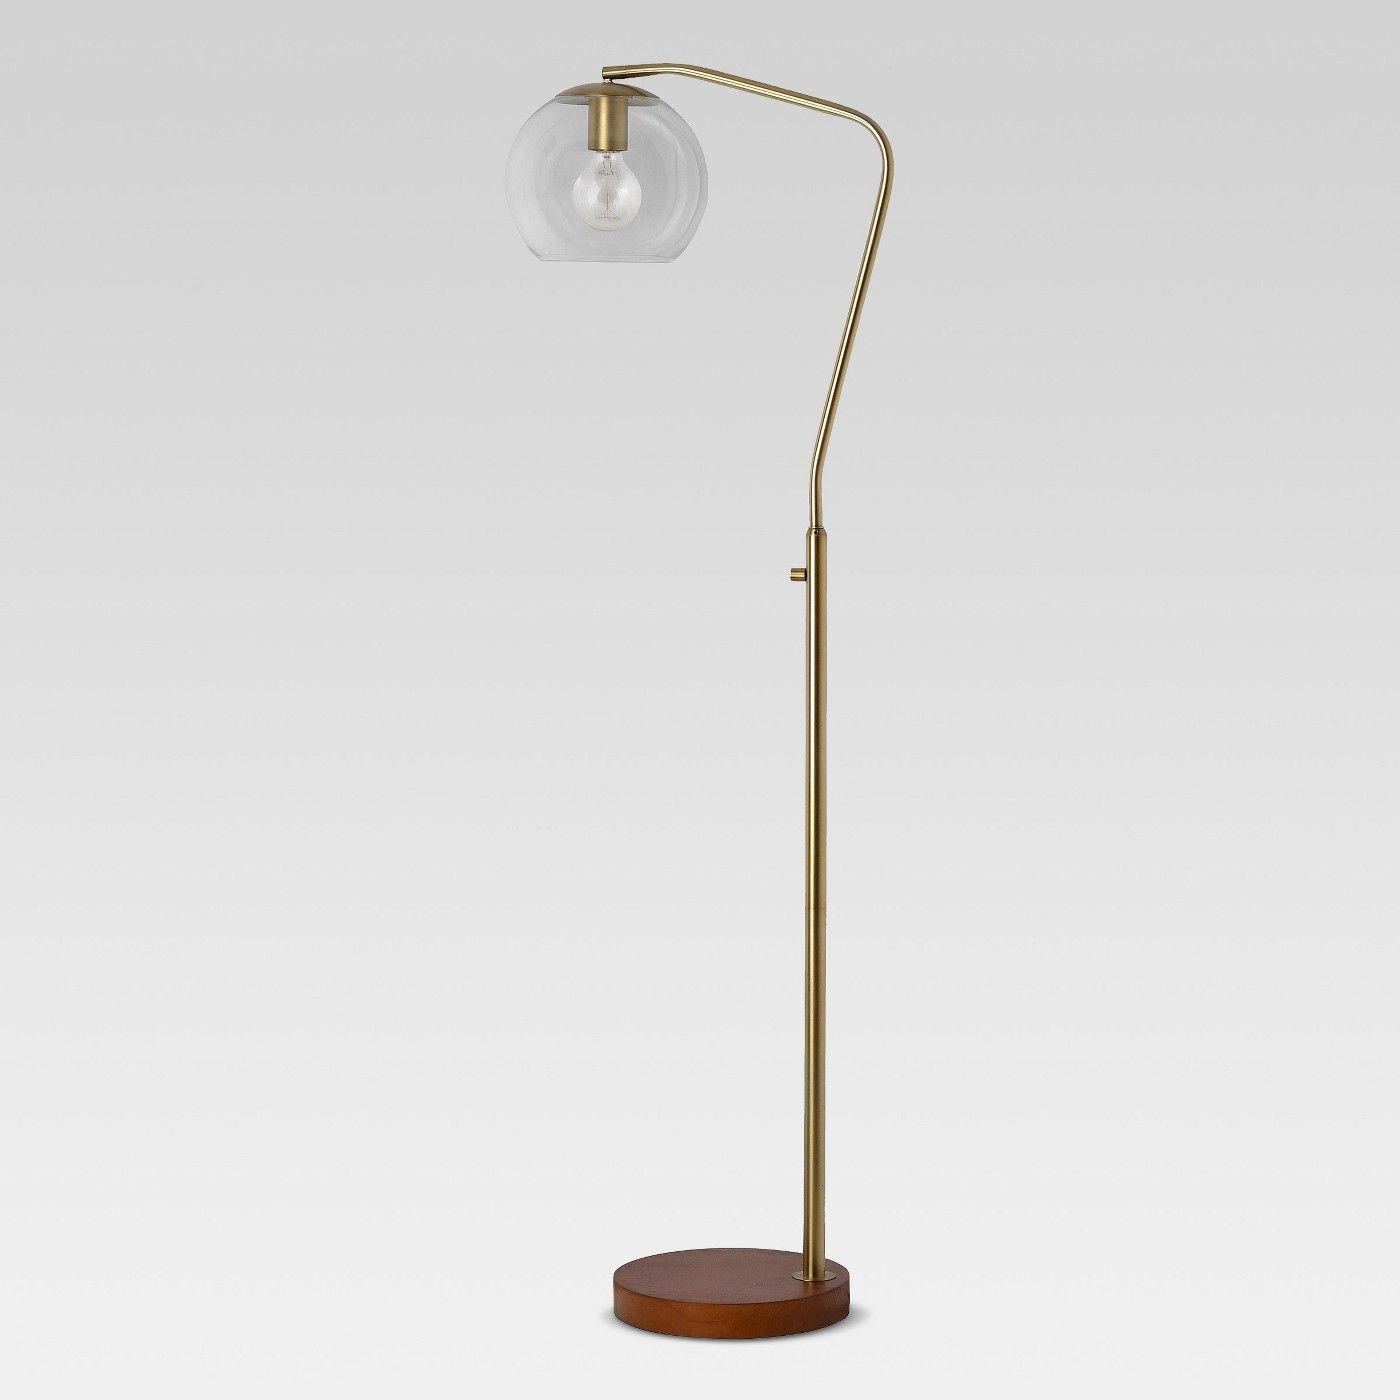 Menlo Glass Globe Floor Lamp Project 62 Image 1 Of 4 within sizing 1400 X 1400